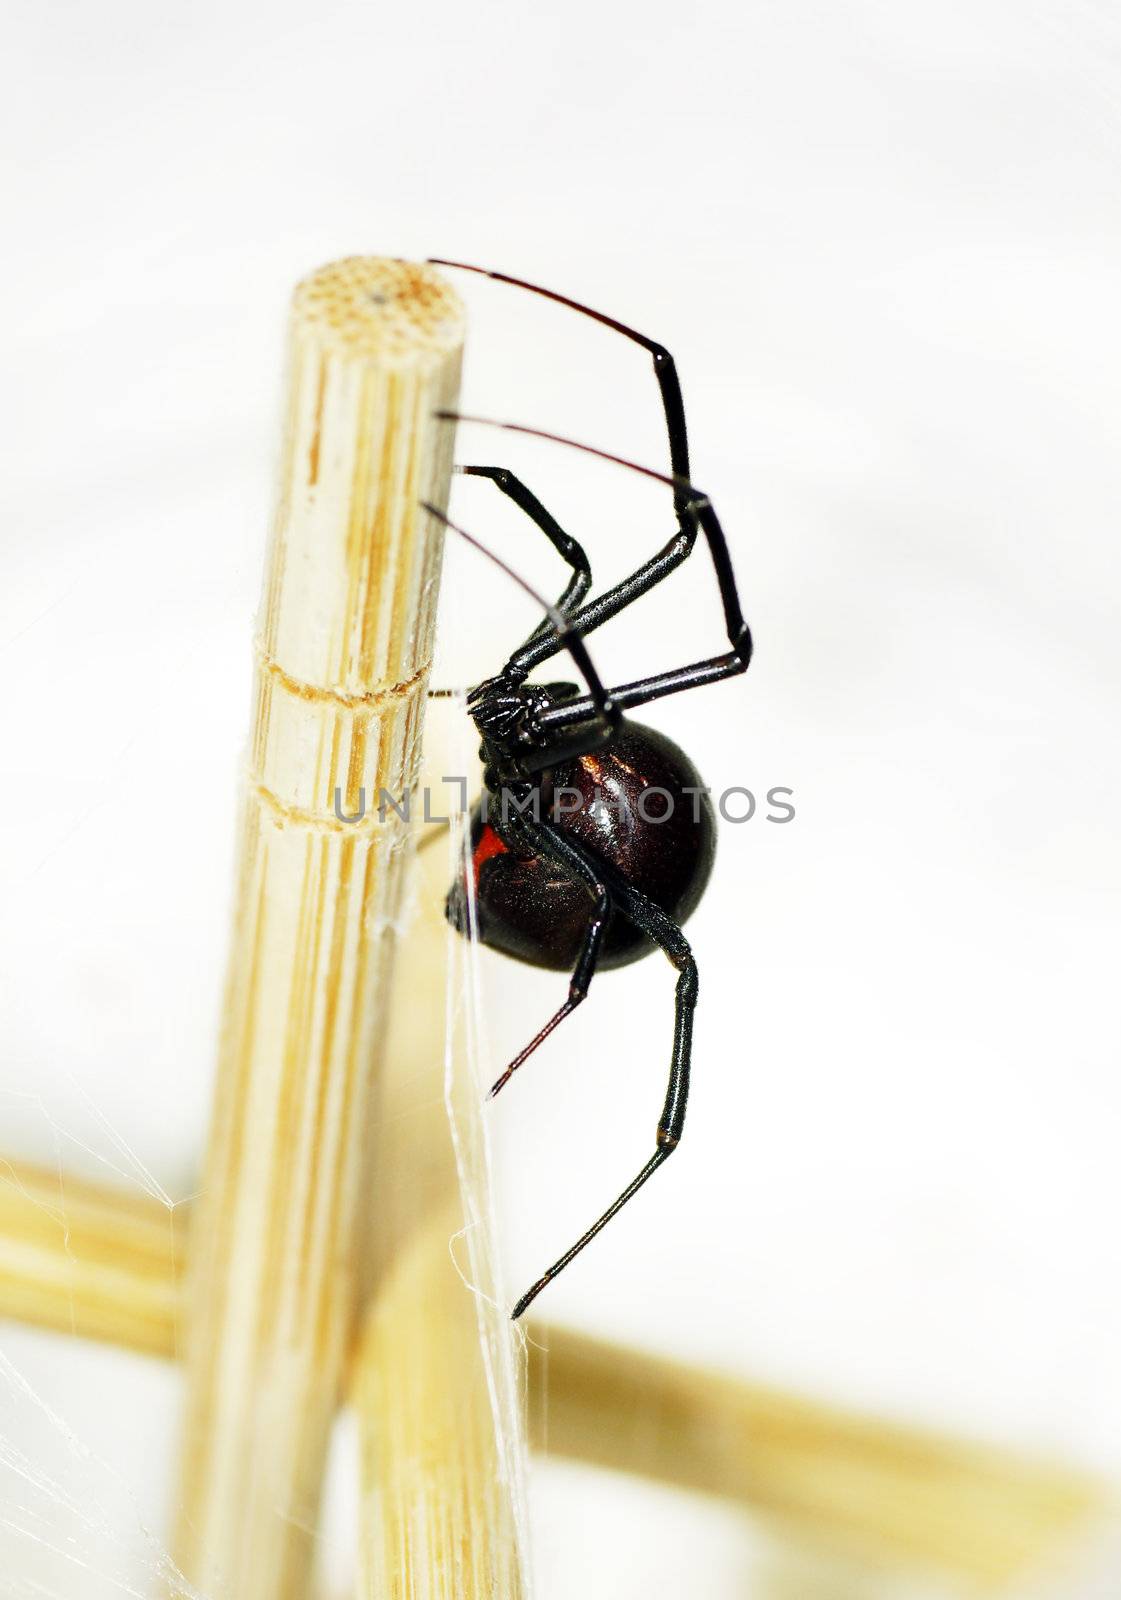 Side view of a beautiful and deadly female black widow spider, Latrodectus hesperus, with visible bright red hourglass shape underneath her abdomen.